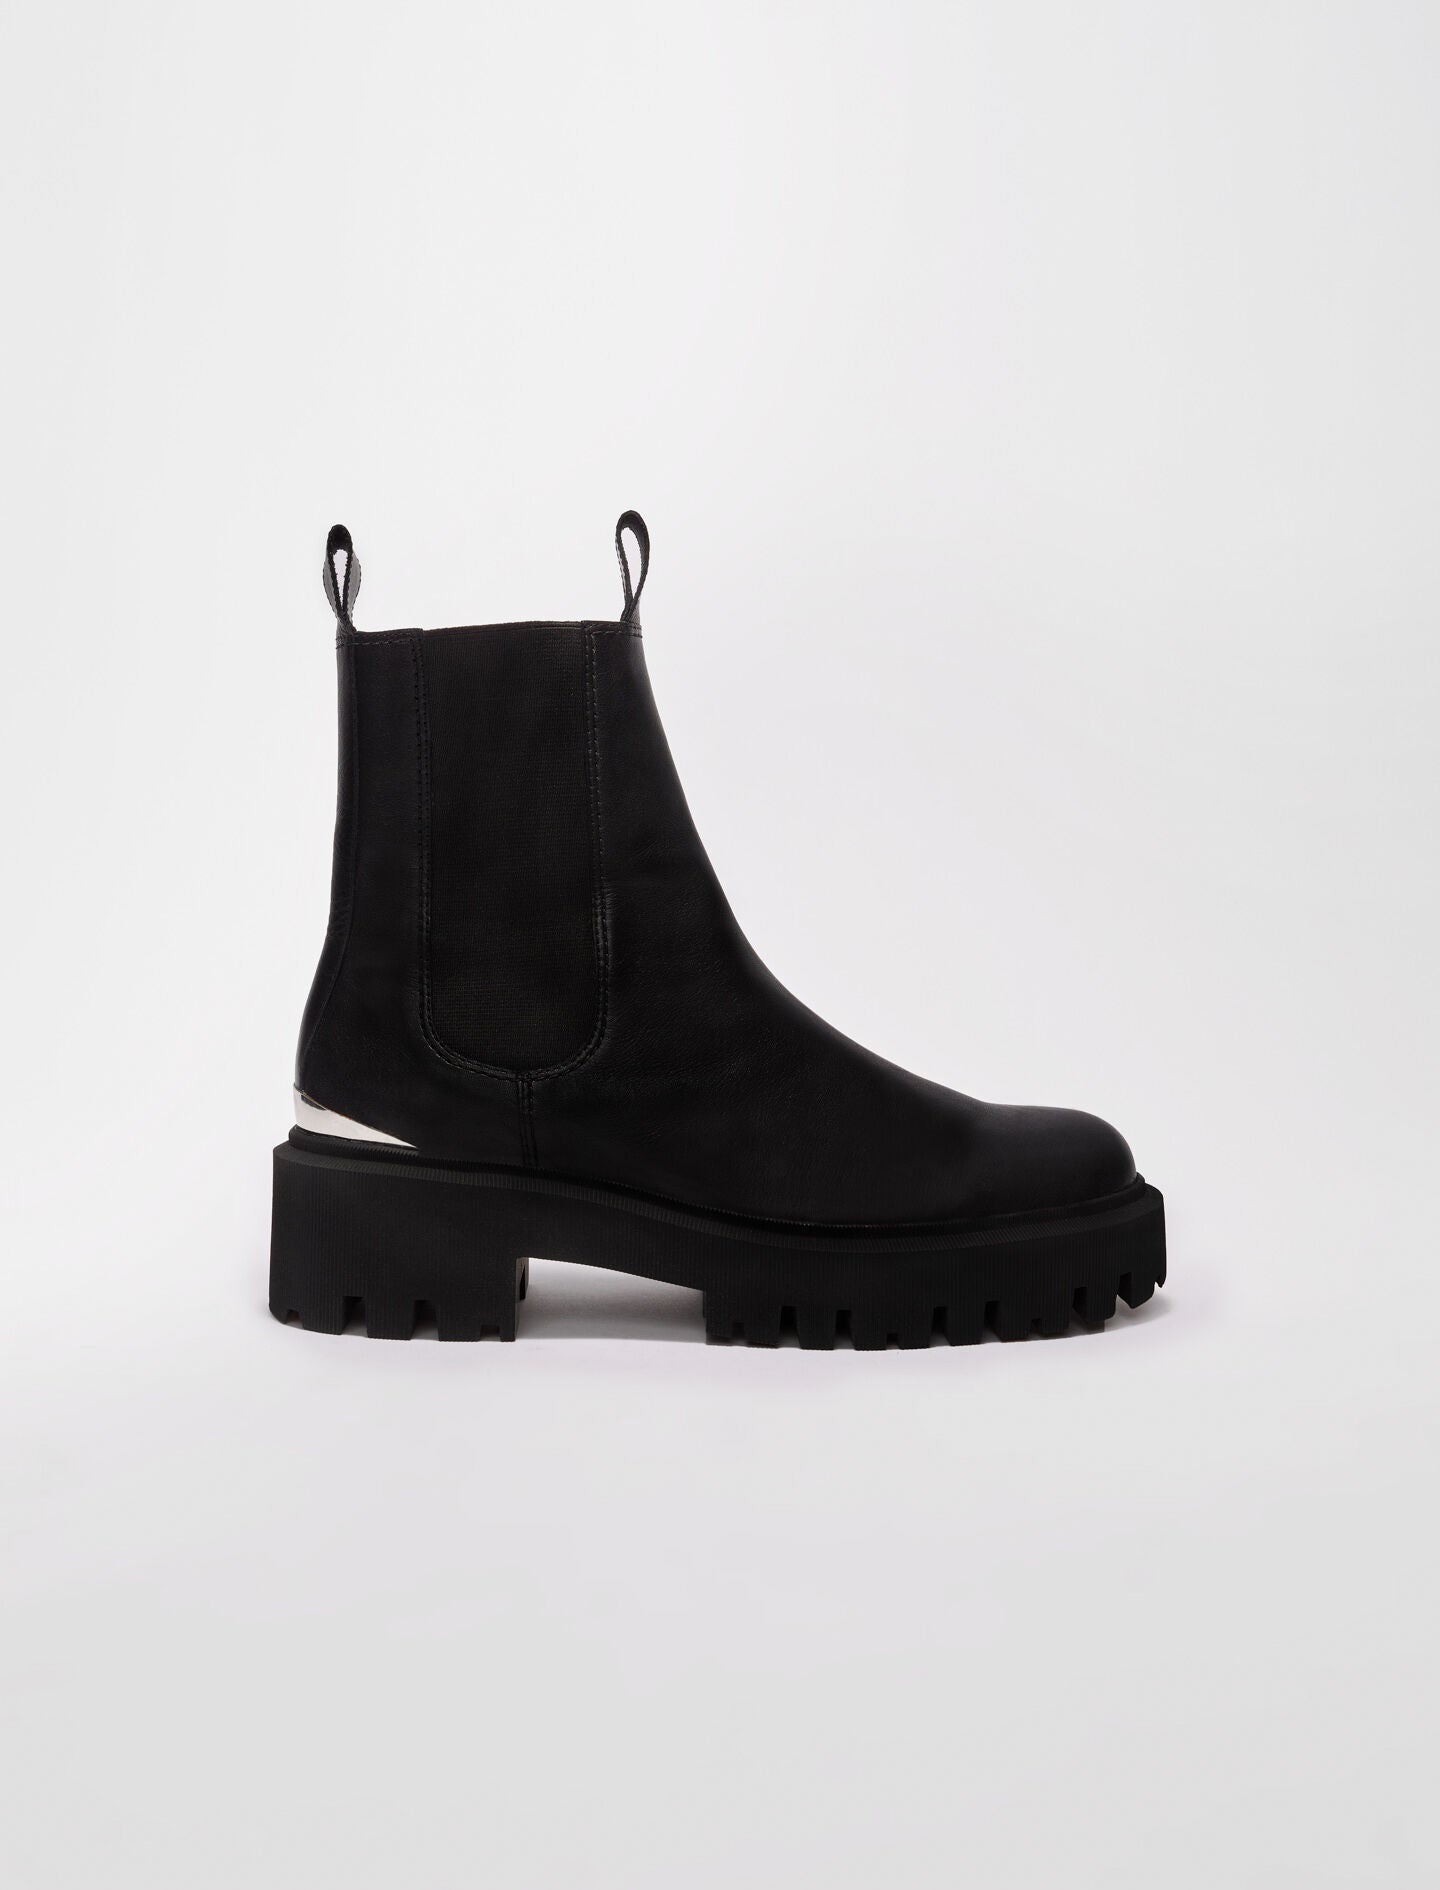 Black-featured-chelsea boots with platform sole